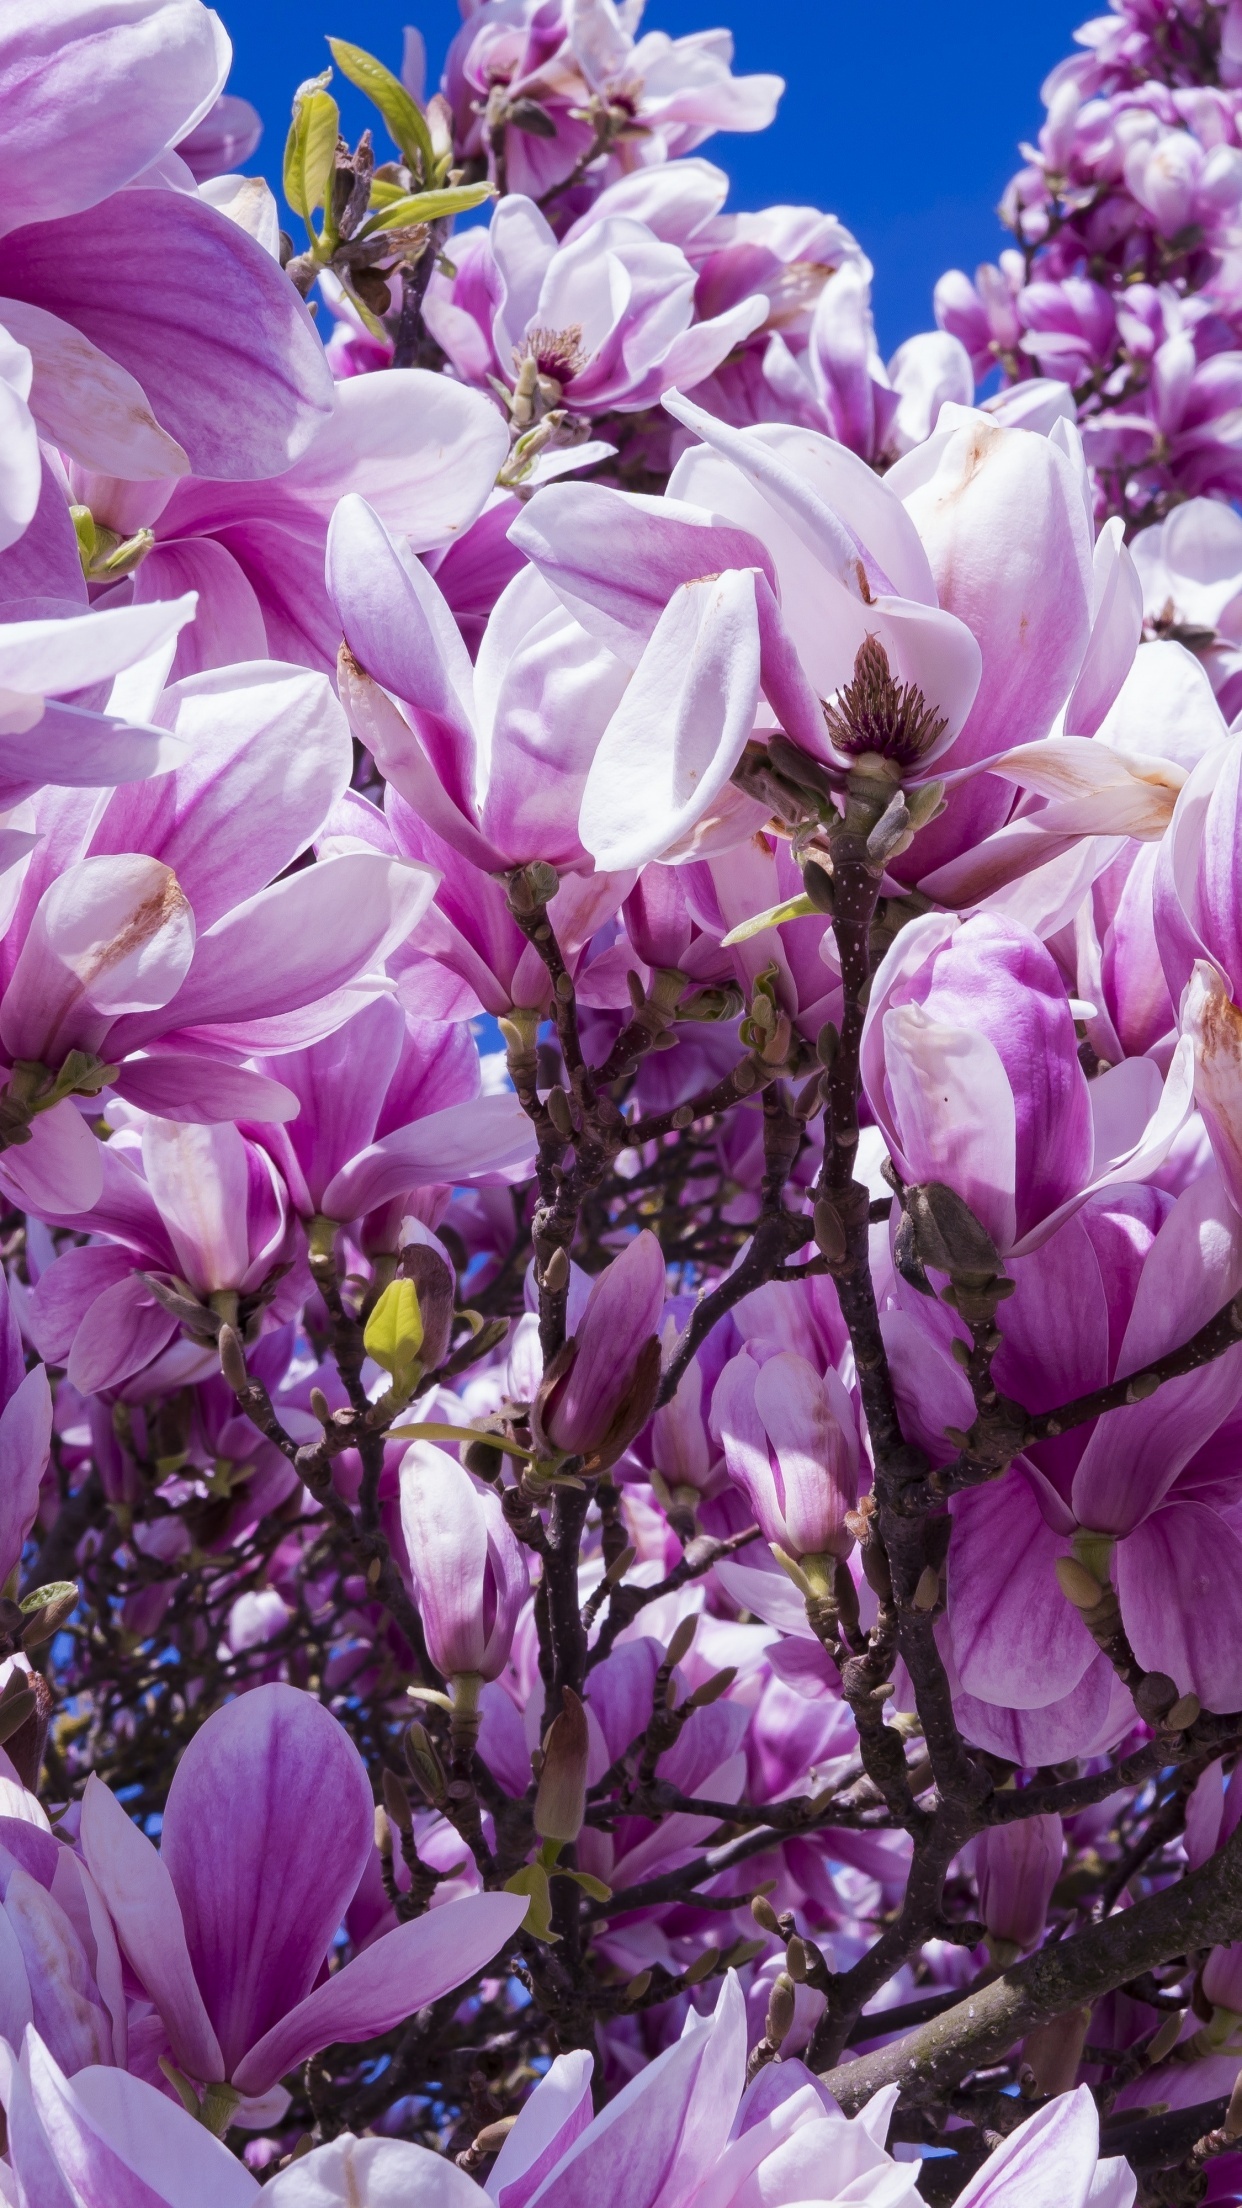 Blossoming magnolias, Pink nature's beauty, Blooms in spring, Serene flowers, 1250x2210 HD Handy